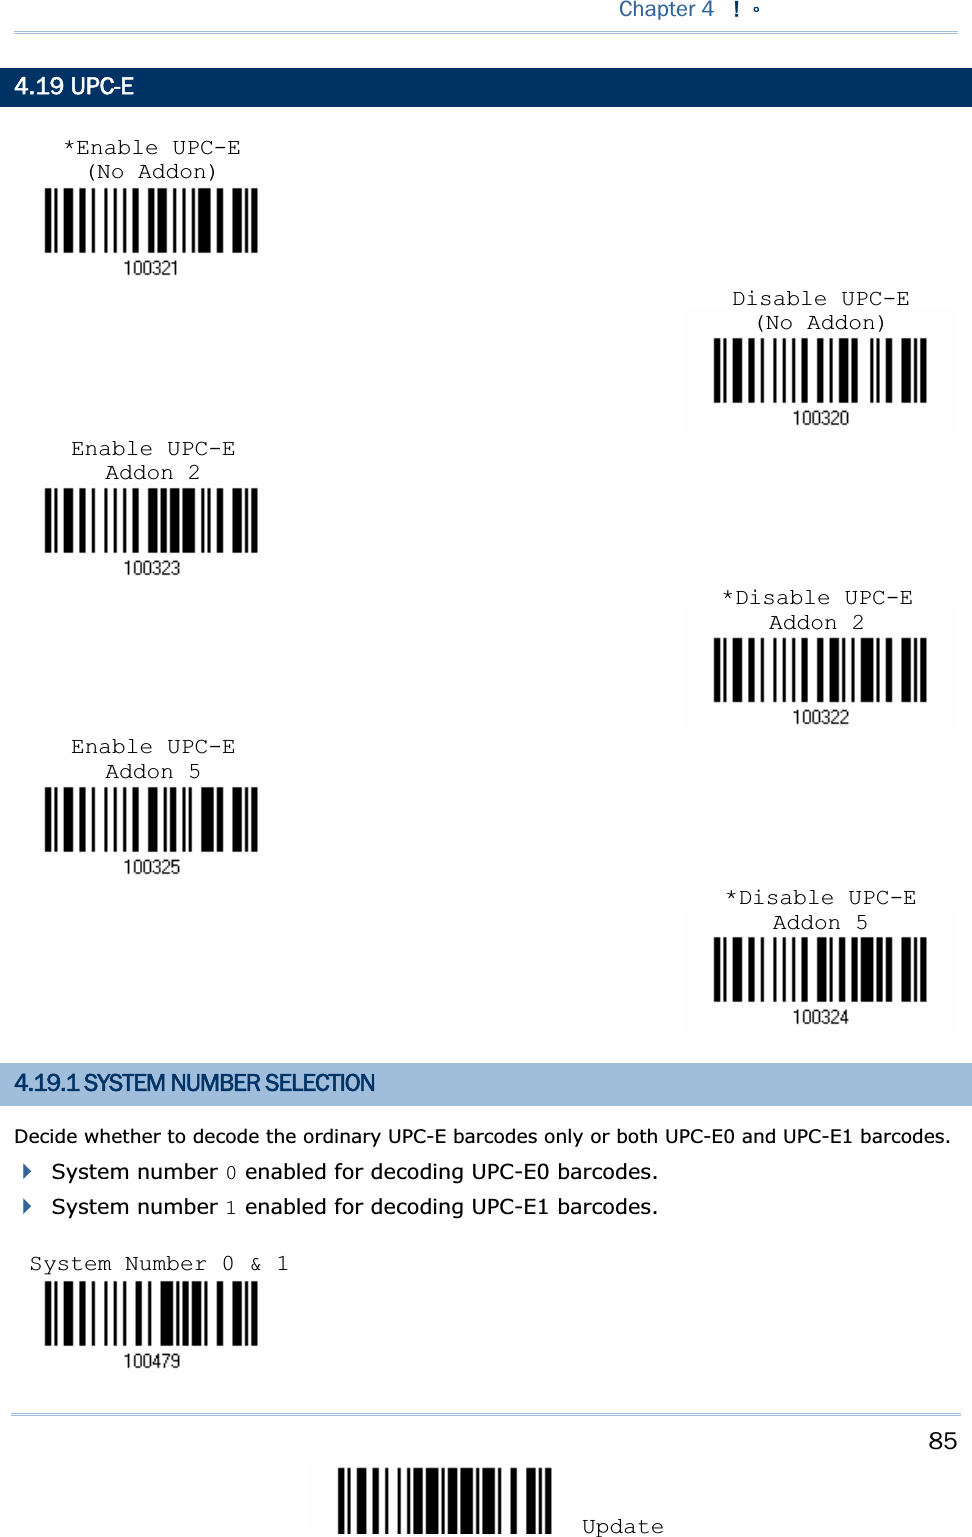 85UpdateChapter 4 !Ζ4.19 UPC-E 4.19.1 SYSTEM NUMBER SELECTION Decide whether to decode the ordinary UPC-E barcodes only or both UPC-E0 and UPC-E1 barcodes. System number 0 enabled for decoding UPC-E0 barcodes. System number 1 enabled for decoding UPC-E1 barcodes. Disable UPC-E (No Addon)*Disable UPC-E Addon 2*Disable UPC-E Addon 5Enable UPC-E Addon 2Enable UPC-E Addon 5*Enable UPC-E (No Addon)System Number 0 &amp; 1 